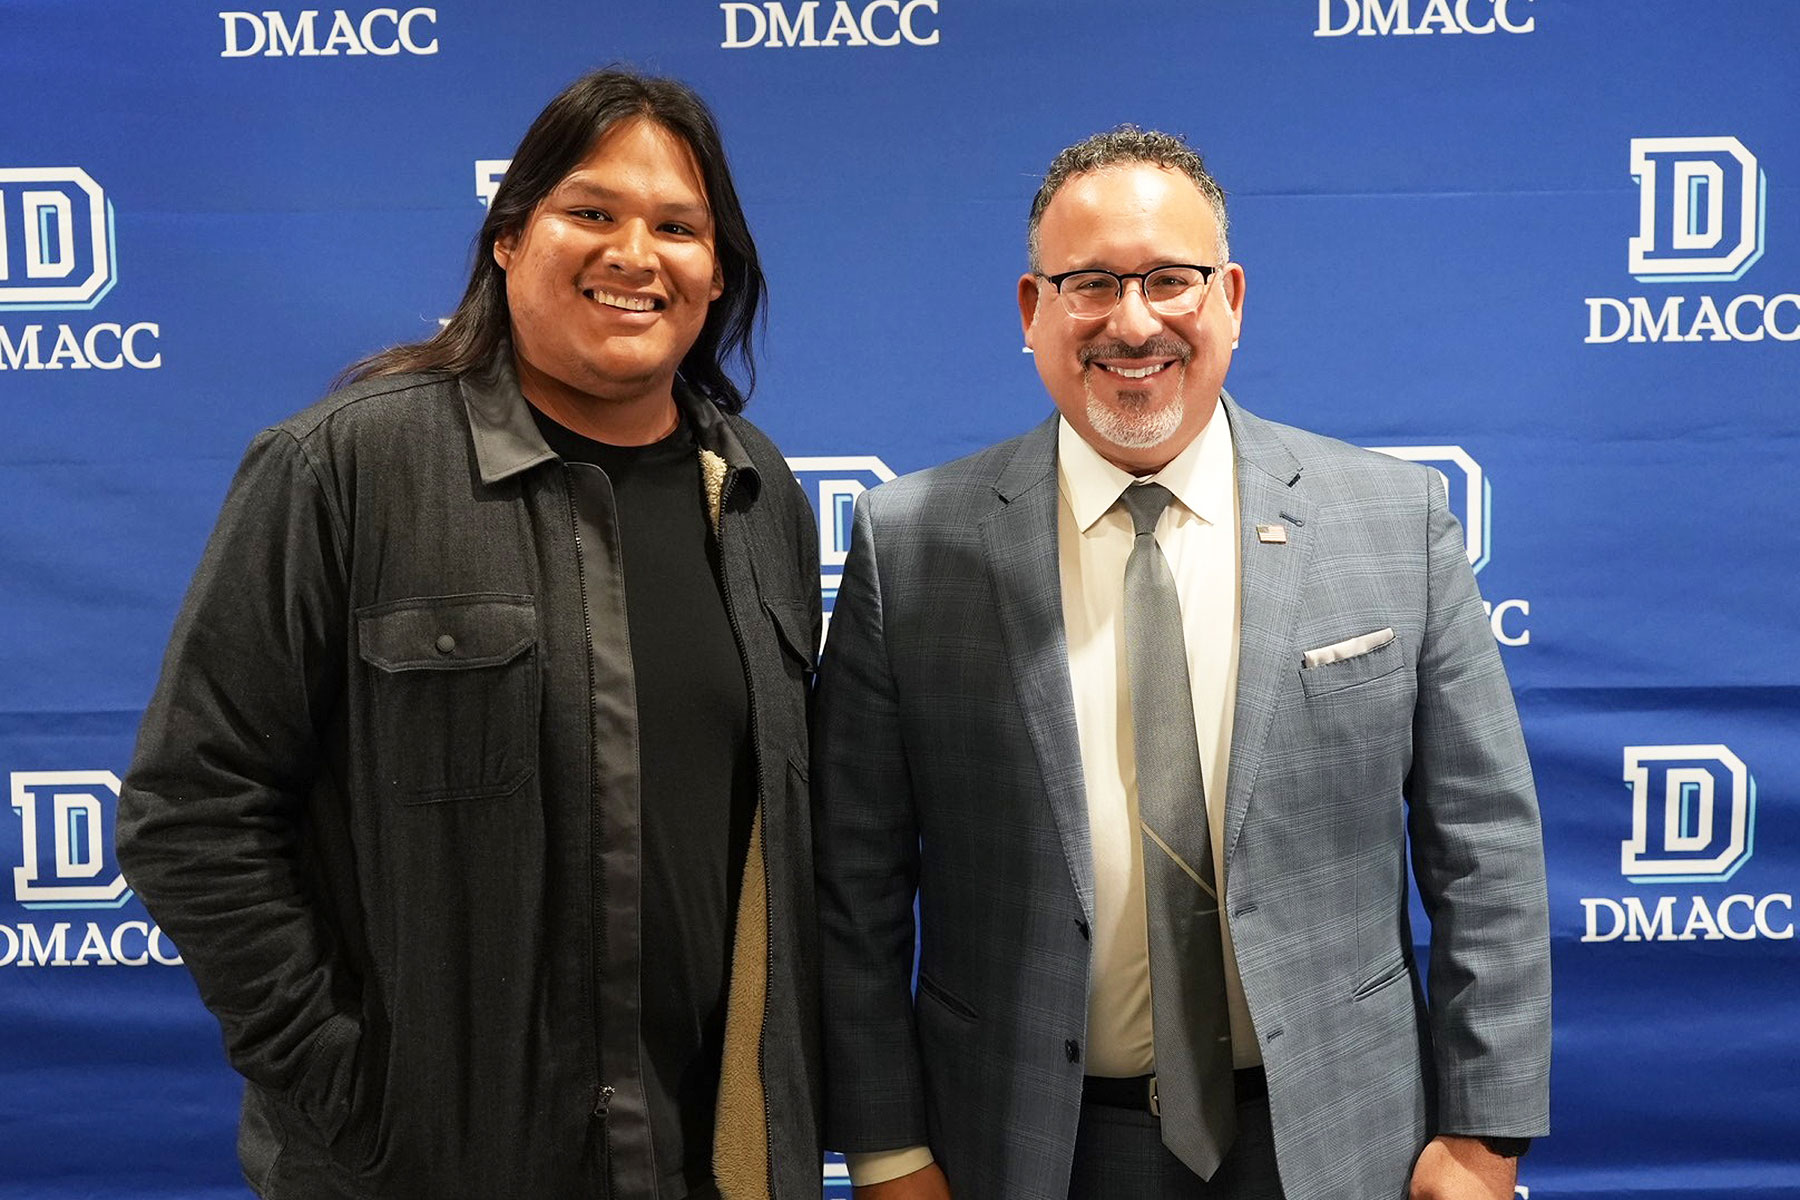 Second-year DMACC Education student Jay McCord (left) of Perry joins U.S. Secretary of Education Dr. Miguel Cardona for a photo on Dec. 7, 2023, at the DMACC Ankeny Campus.   "I want to give students a reason to come to school and be able to serve as a positive role model for students who don't have one," said McCord, who has worked as a paraeducator in the Perry Community School District for the past three years and is currently furthering his education at DMACC.